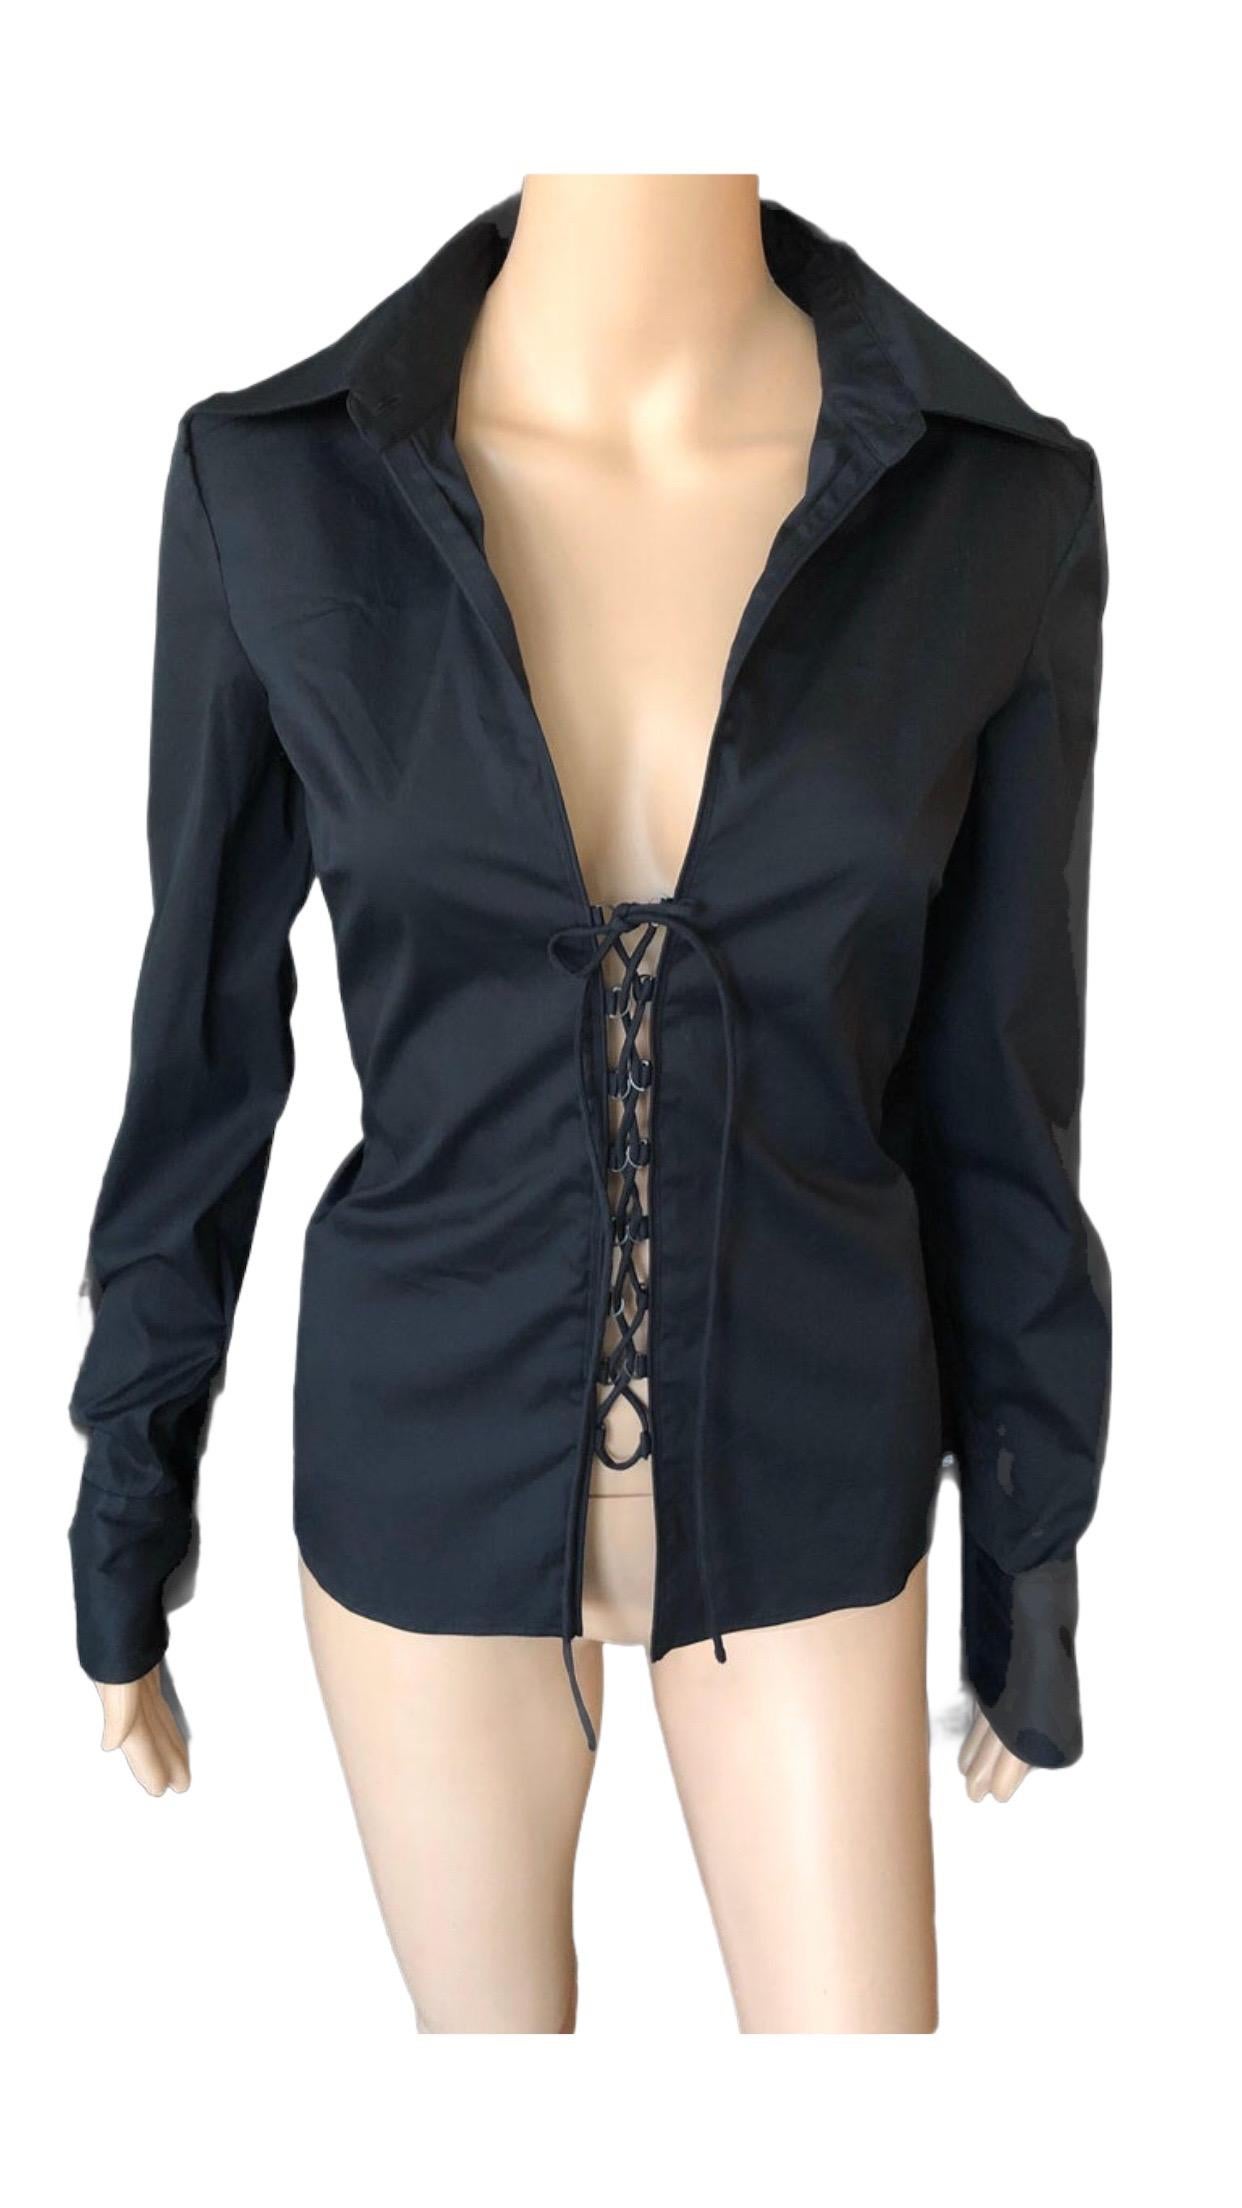 Women's Tom Ford for Gucci S/S 2002 Lace-up Black Top Shirt For Sale